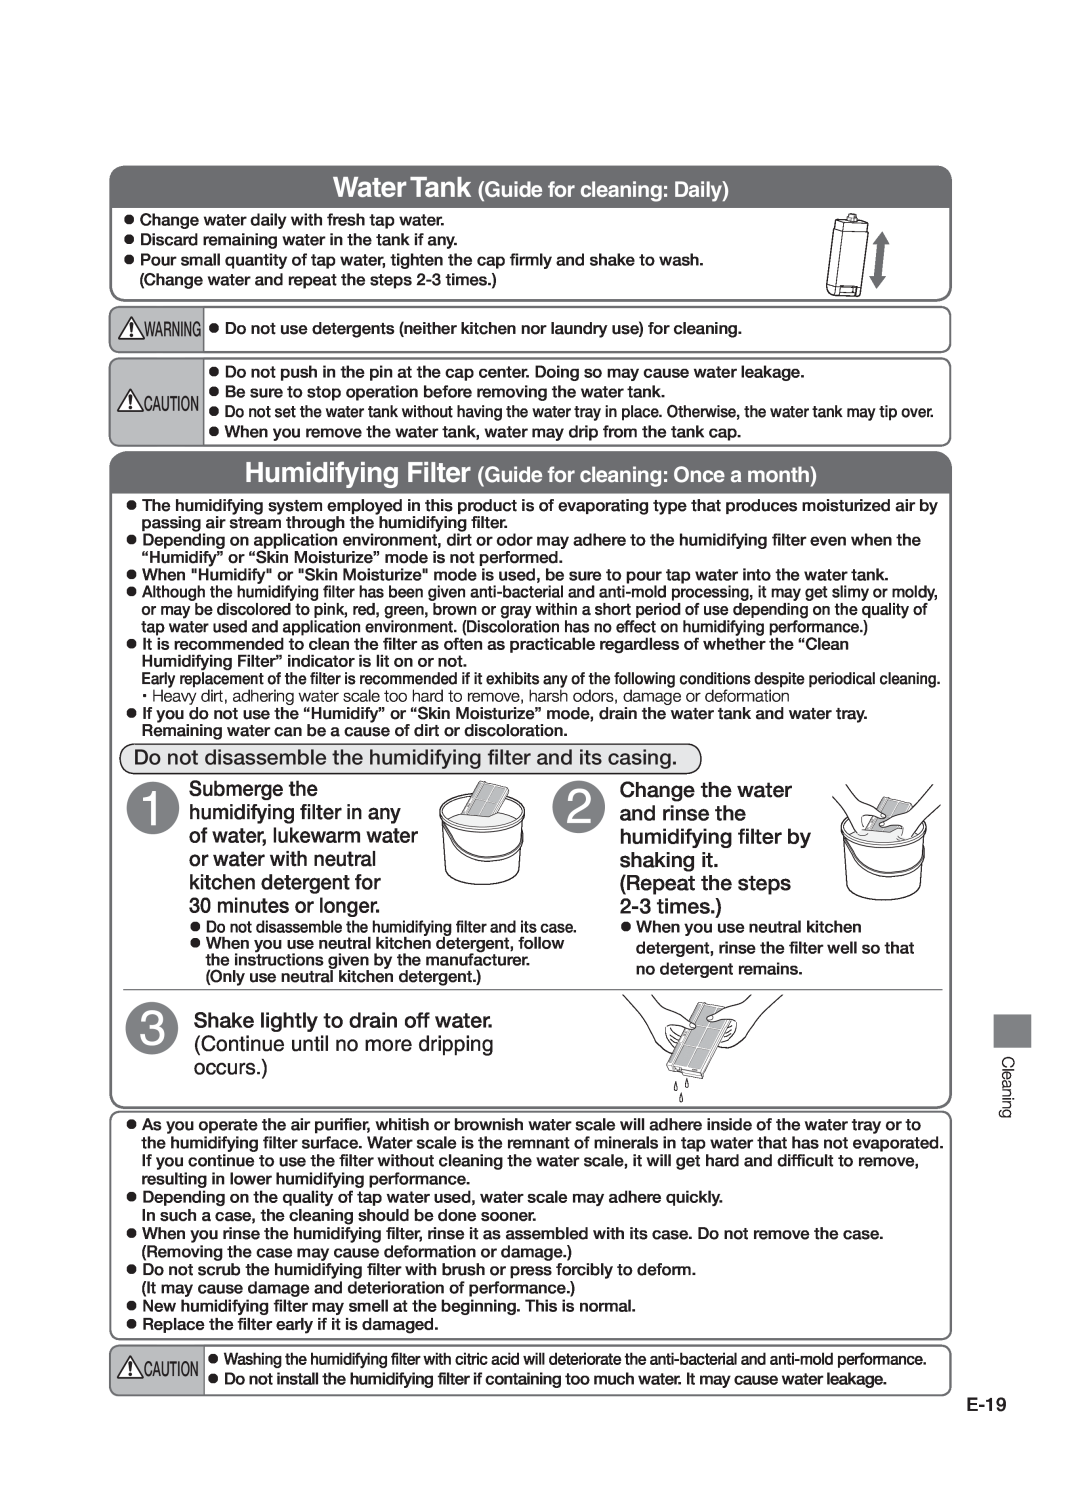 Hitachi EP-A7000 instruction manual Water Tank Guide for cleaning Daily 